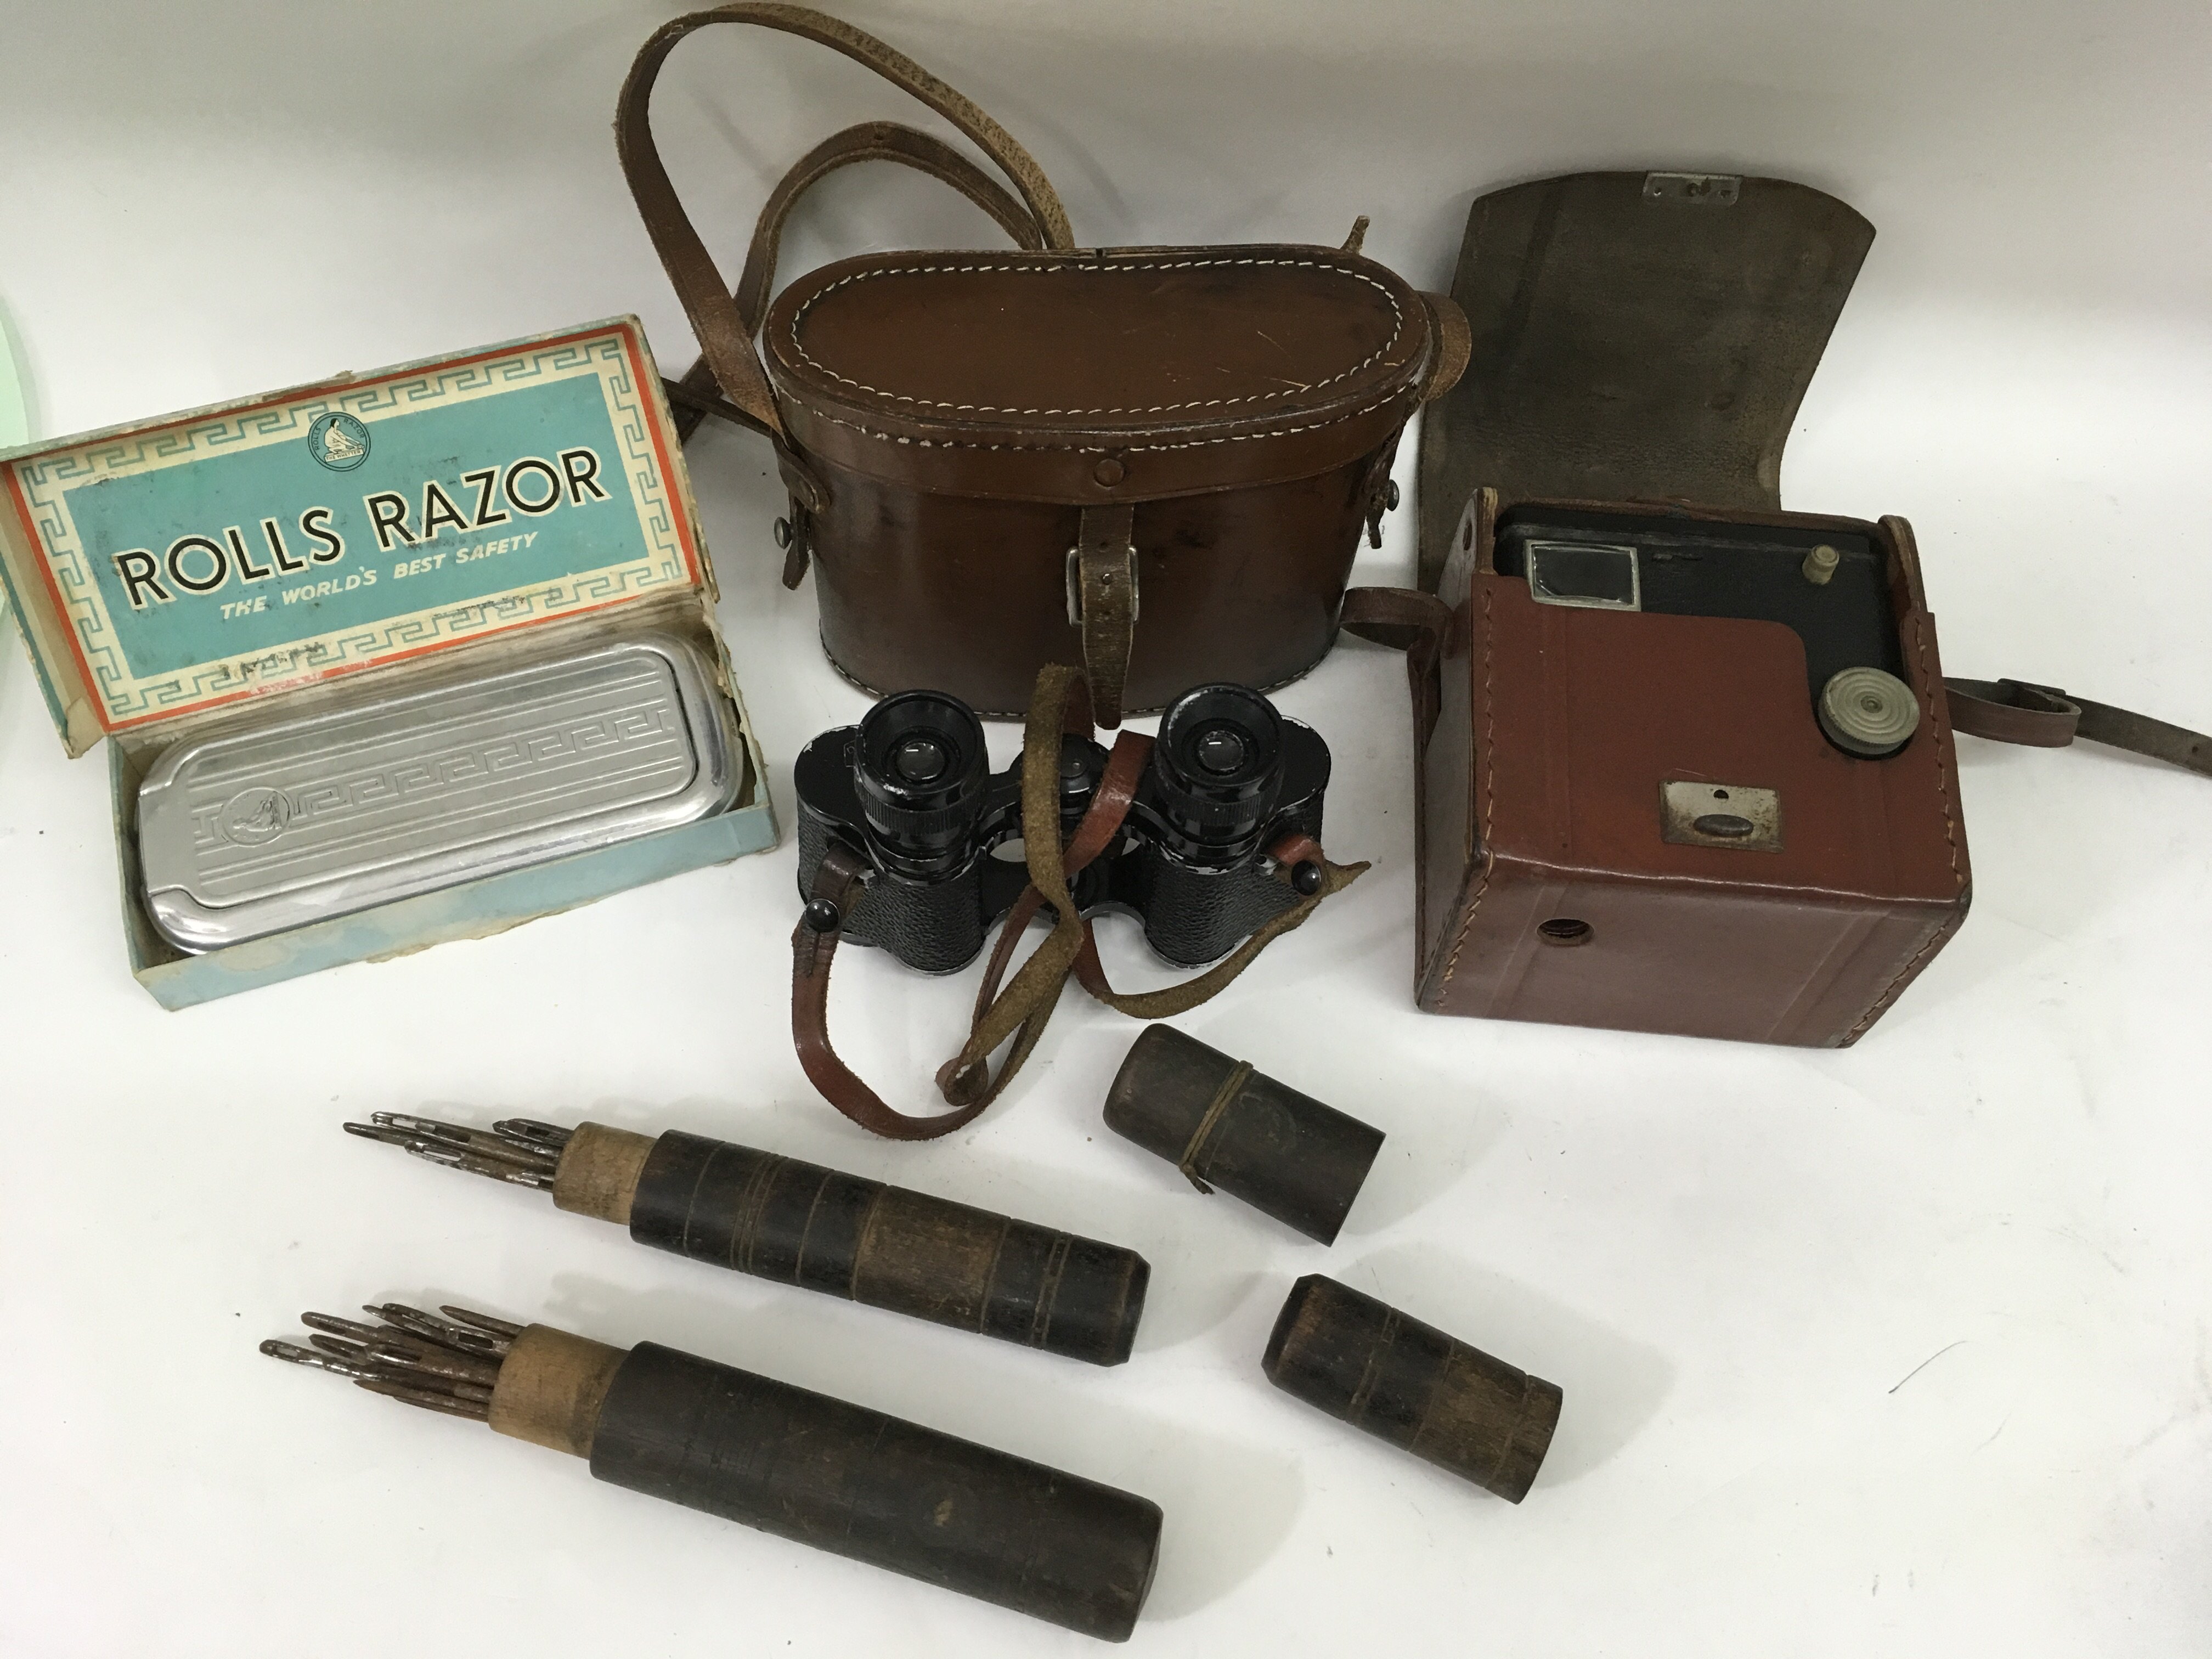 A pair of old wooden cased sailmaker's needles, box brownie camera, and Deraisme binoculars